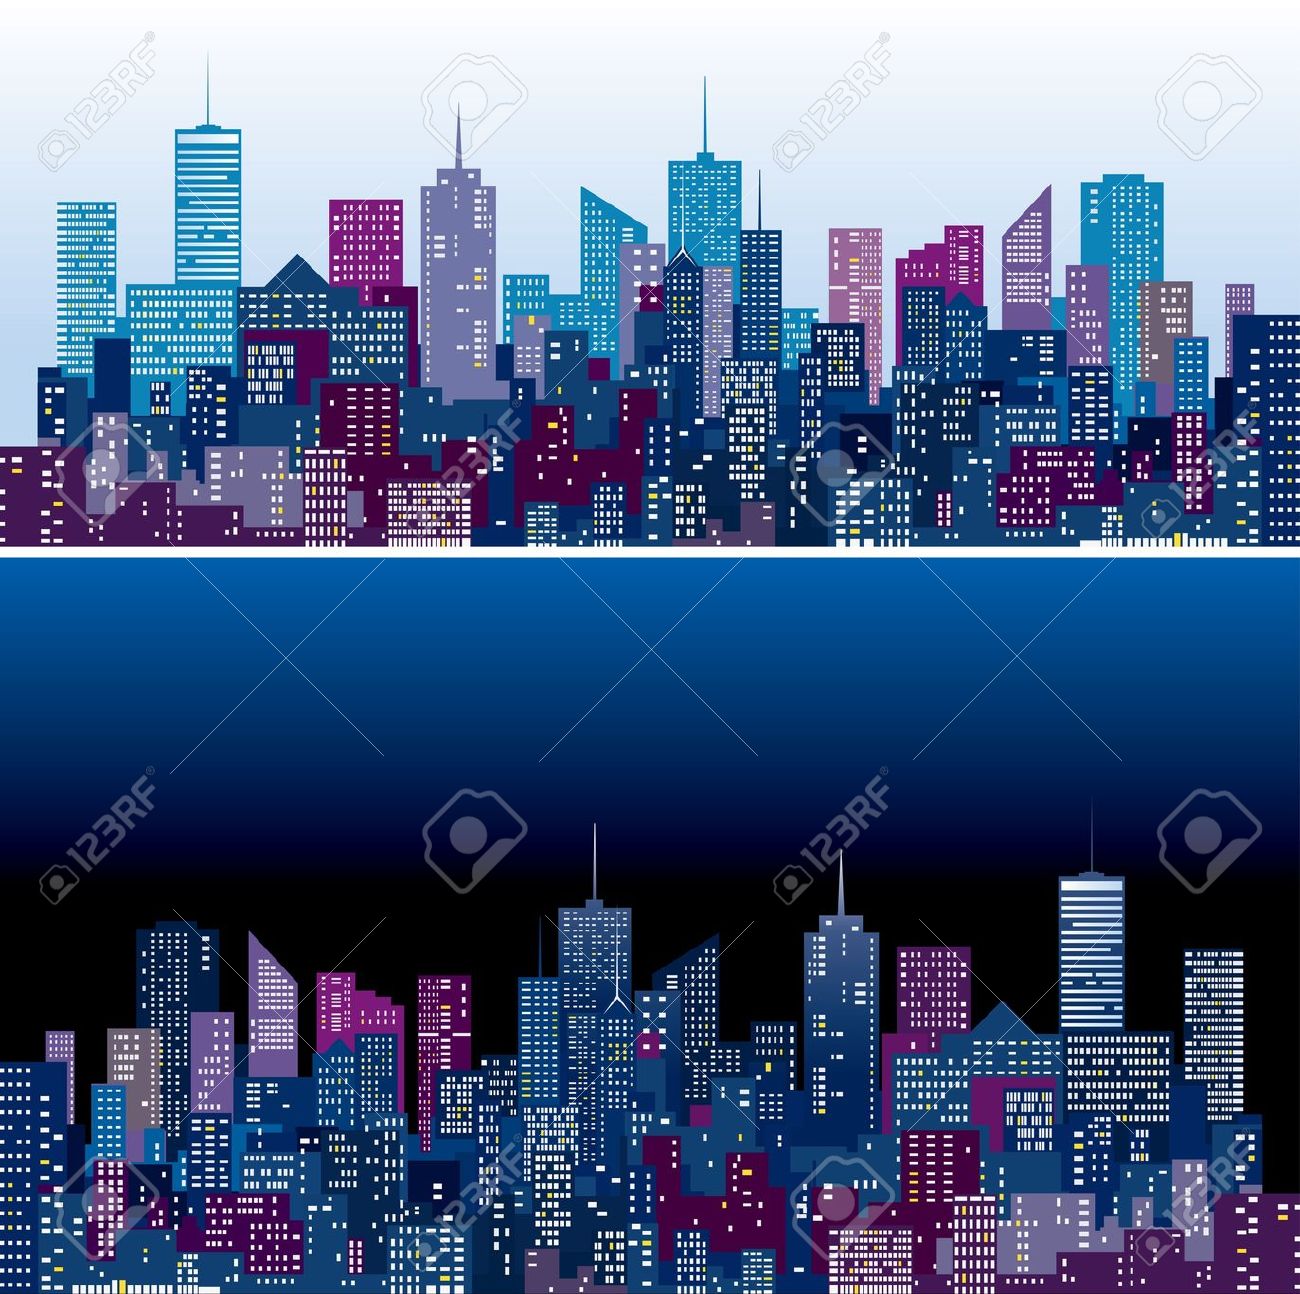 New York Skyline Silhouette Images & Stock Pictures. Royalty Free.